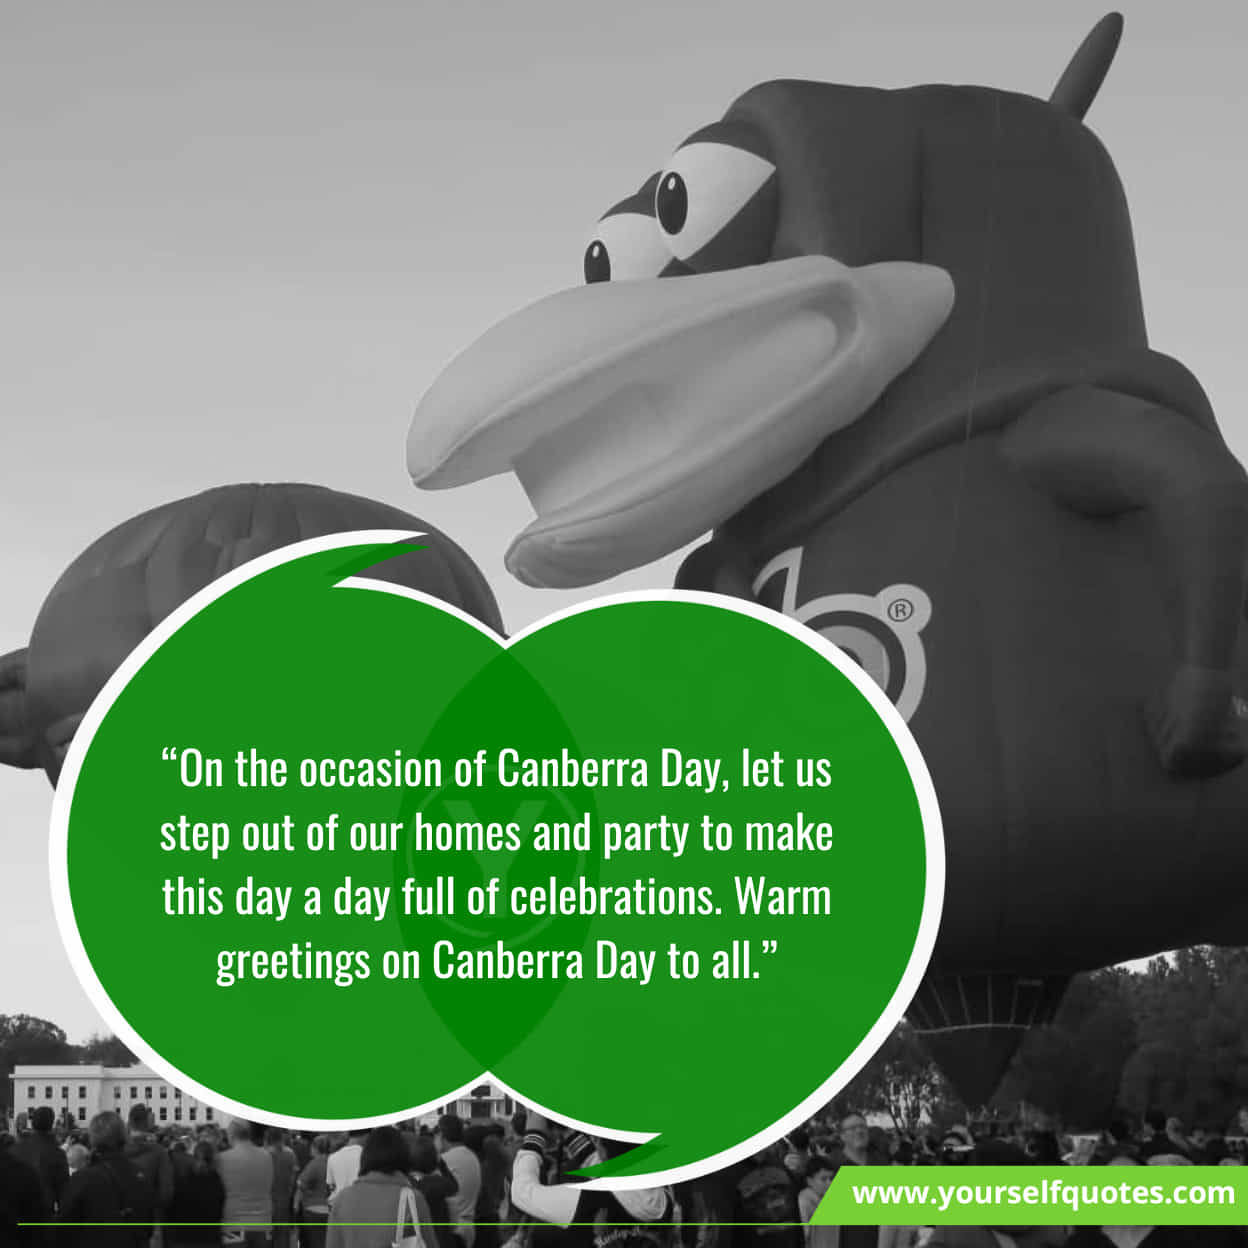 Happy Canberra Day Wishes, Quotes, Messages and Greeting